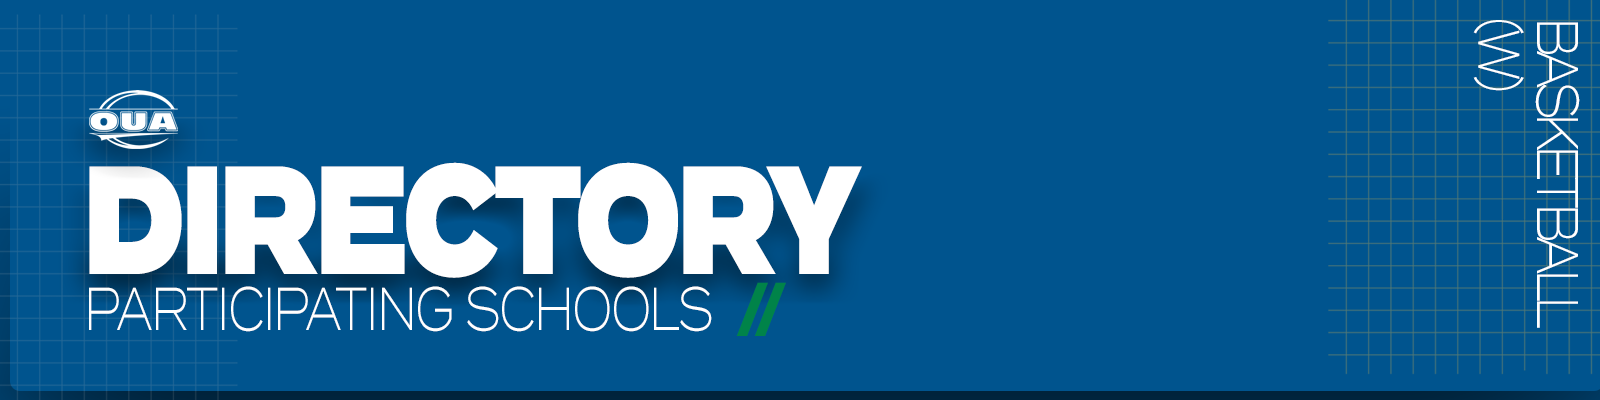 Predominantly blue graphic with large white text on the left side that reads 'Directory, Participating Schools' and small white vertical text on the right side that reads 'Basketball W'